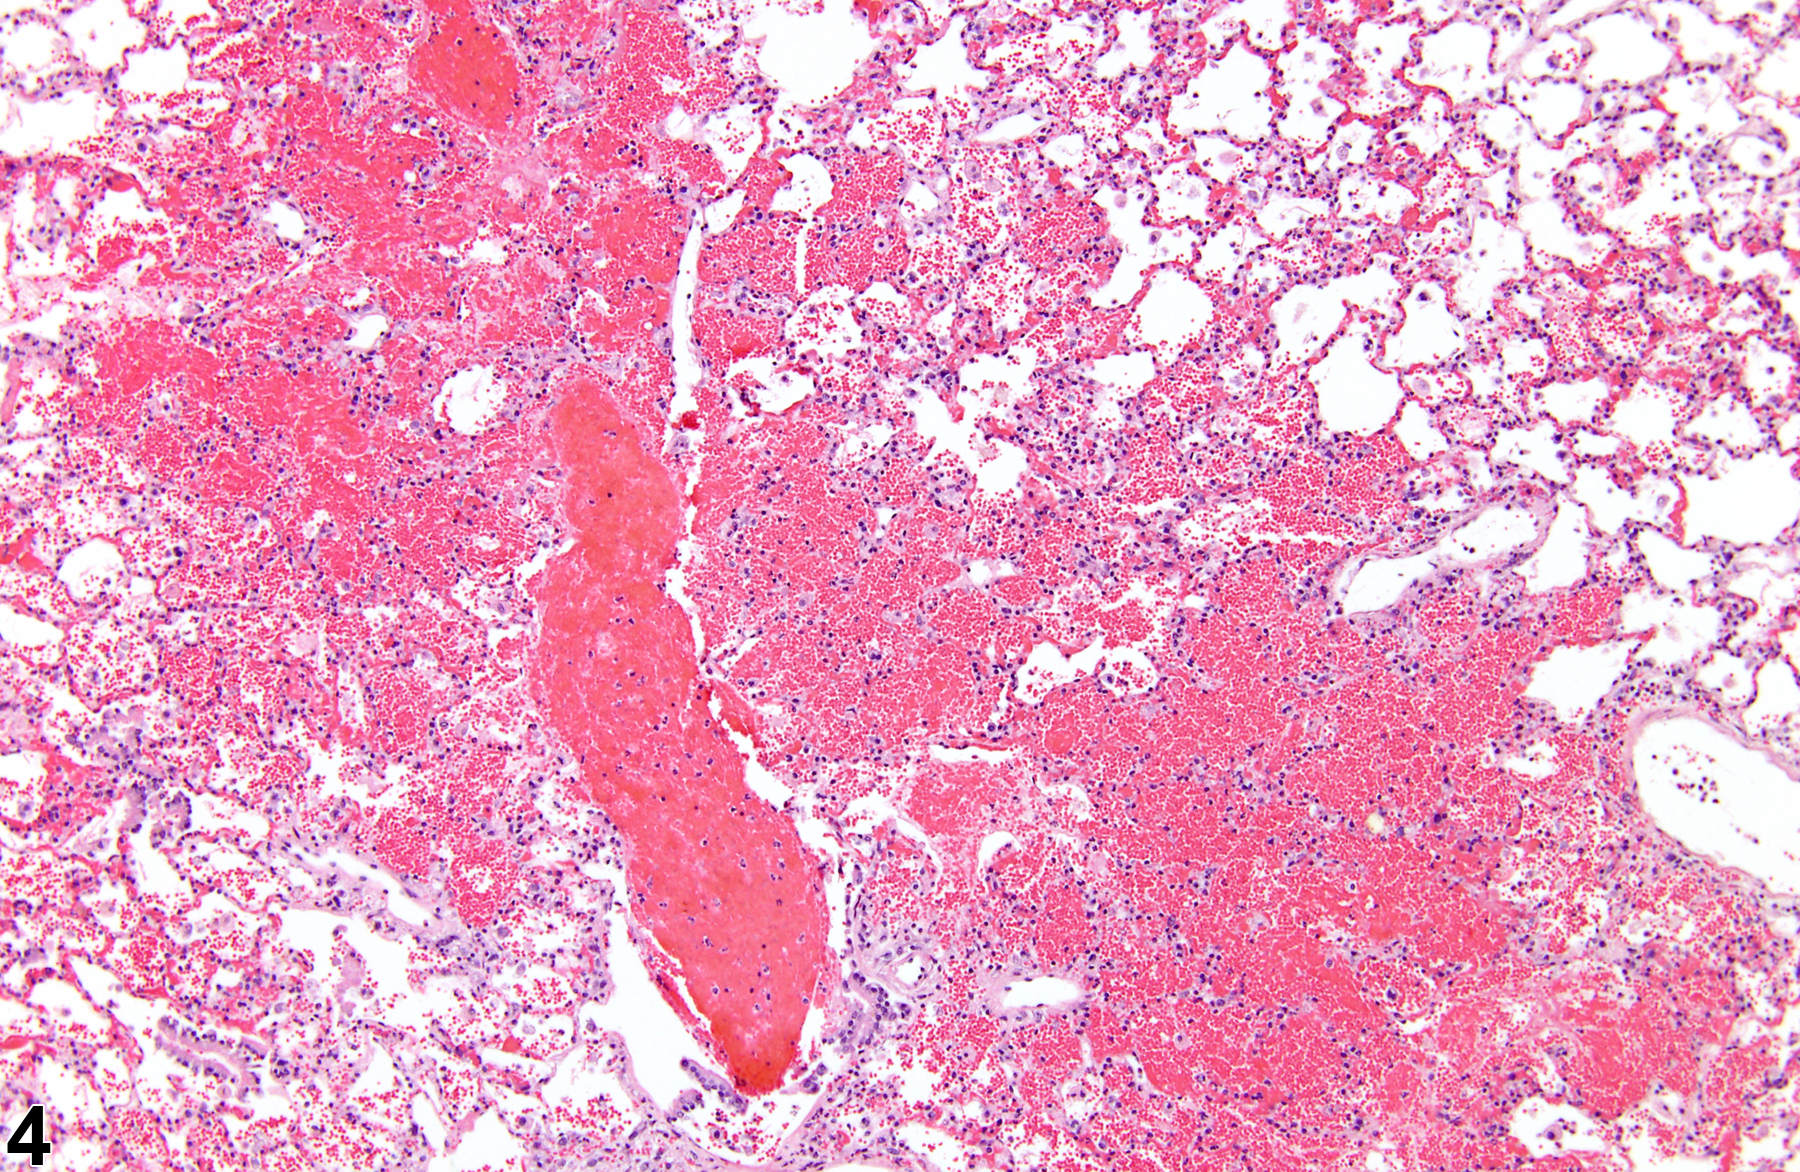 Image of hemorrhage in the lung from a male F344/N rat in a chronic study